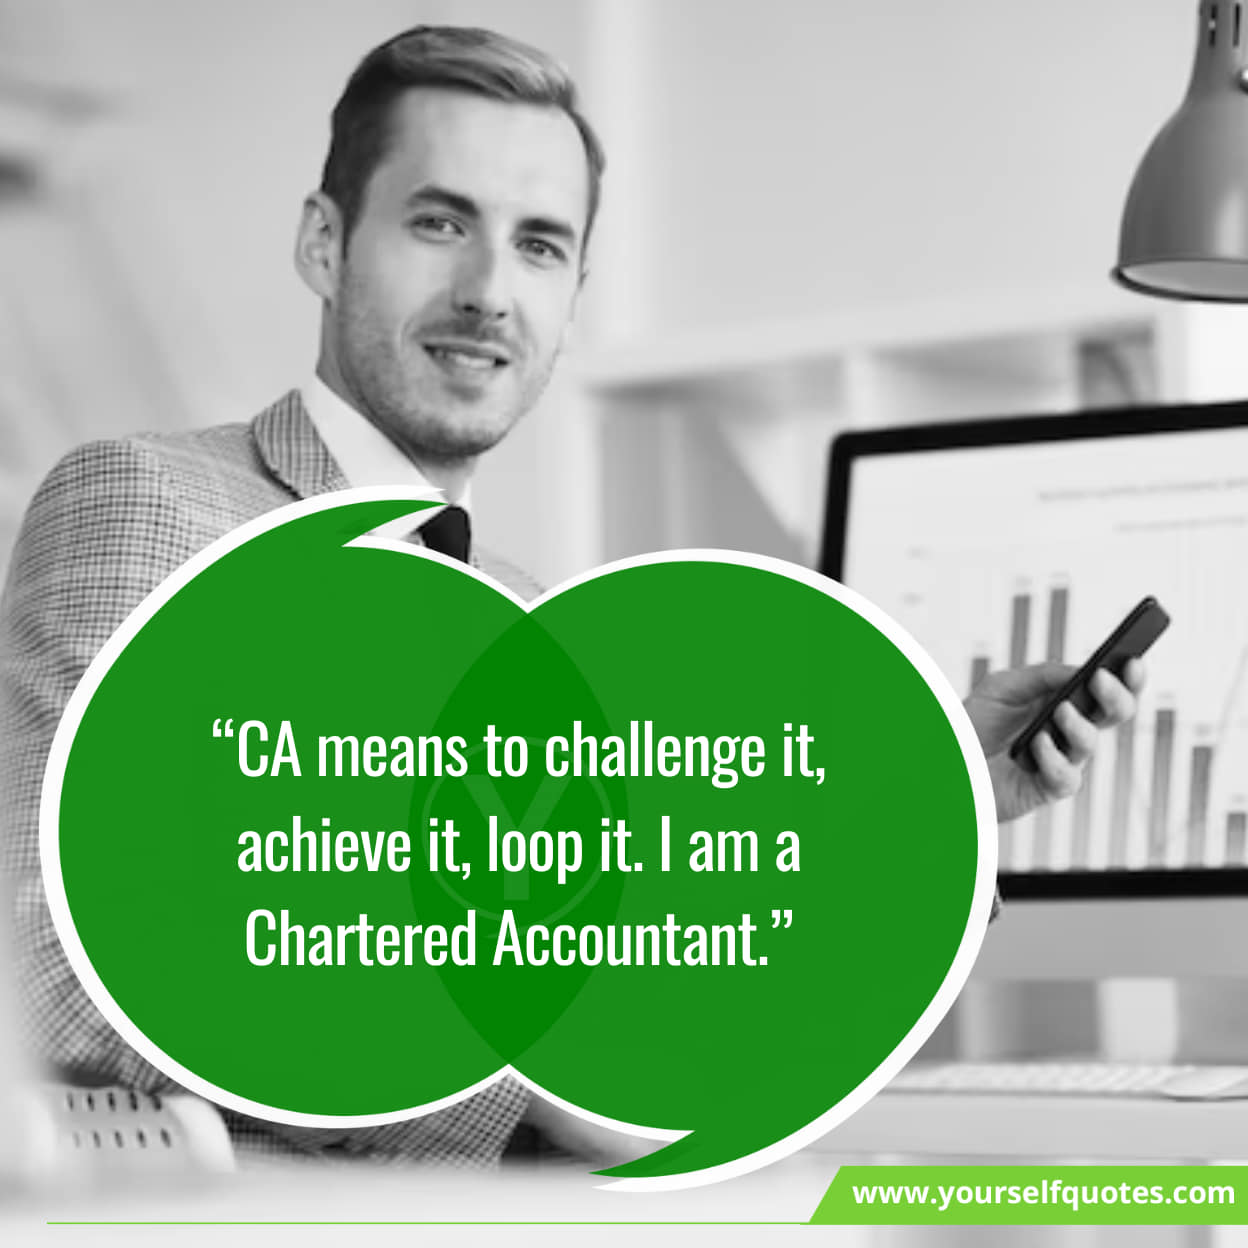 Funny quotes for Chartered Accountants Day